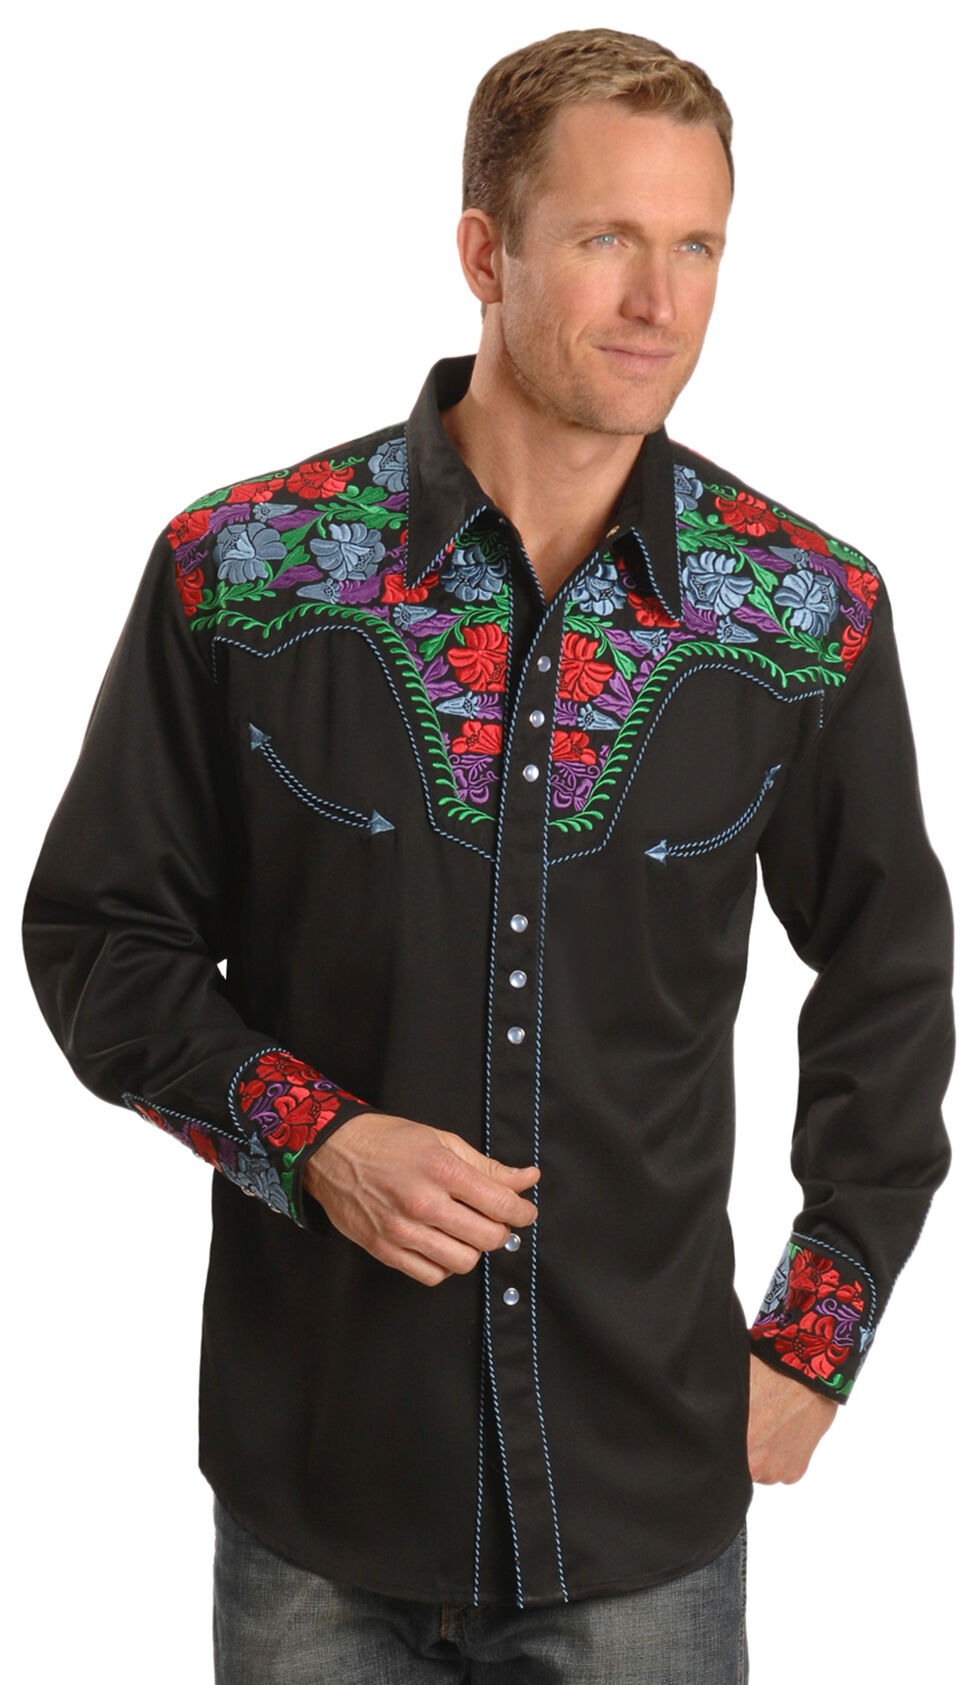 Men's Scully Shirts - Sheplers